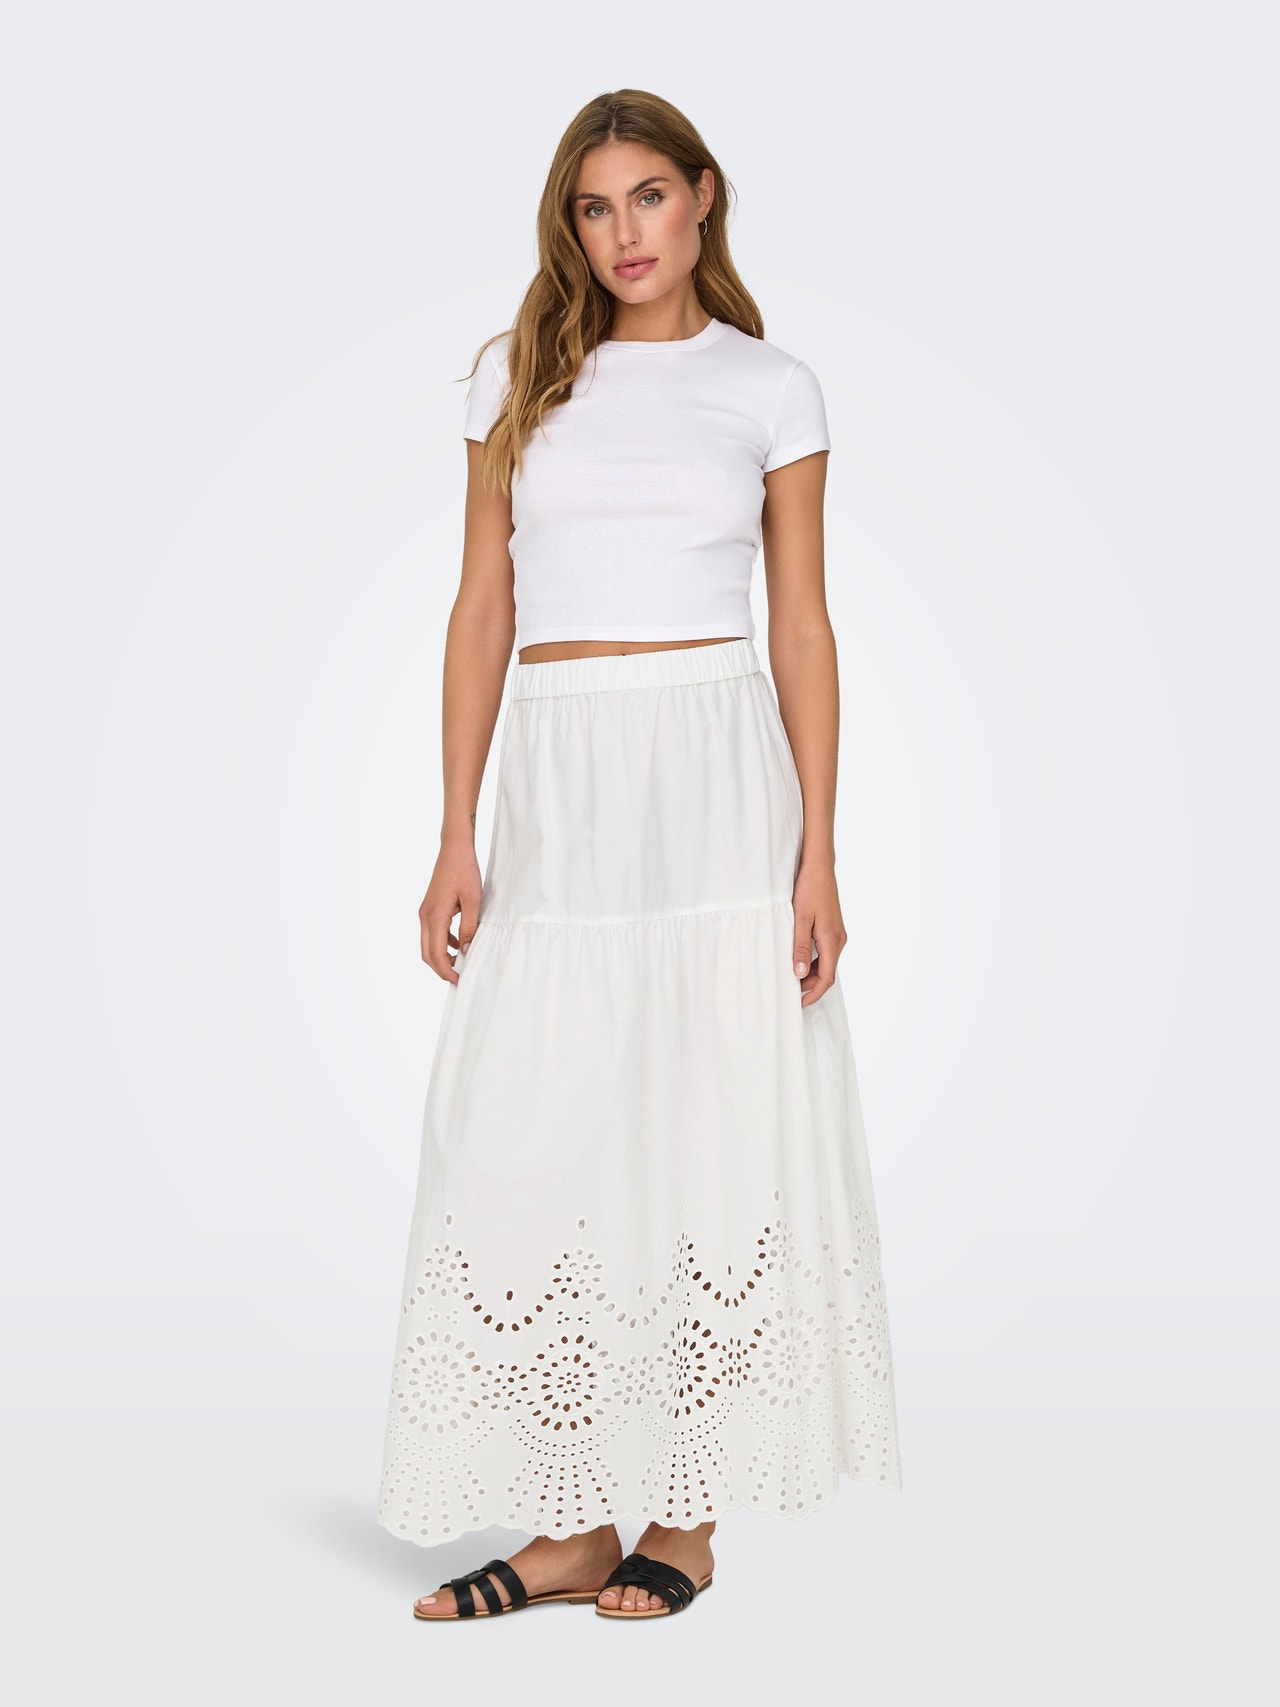 ONLY Maxi skirt with embrodery anglaise -Cloud Dancer - 15319141